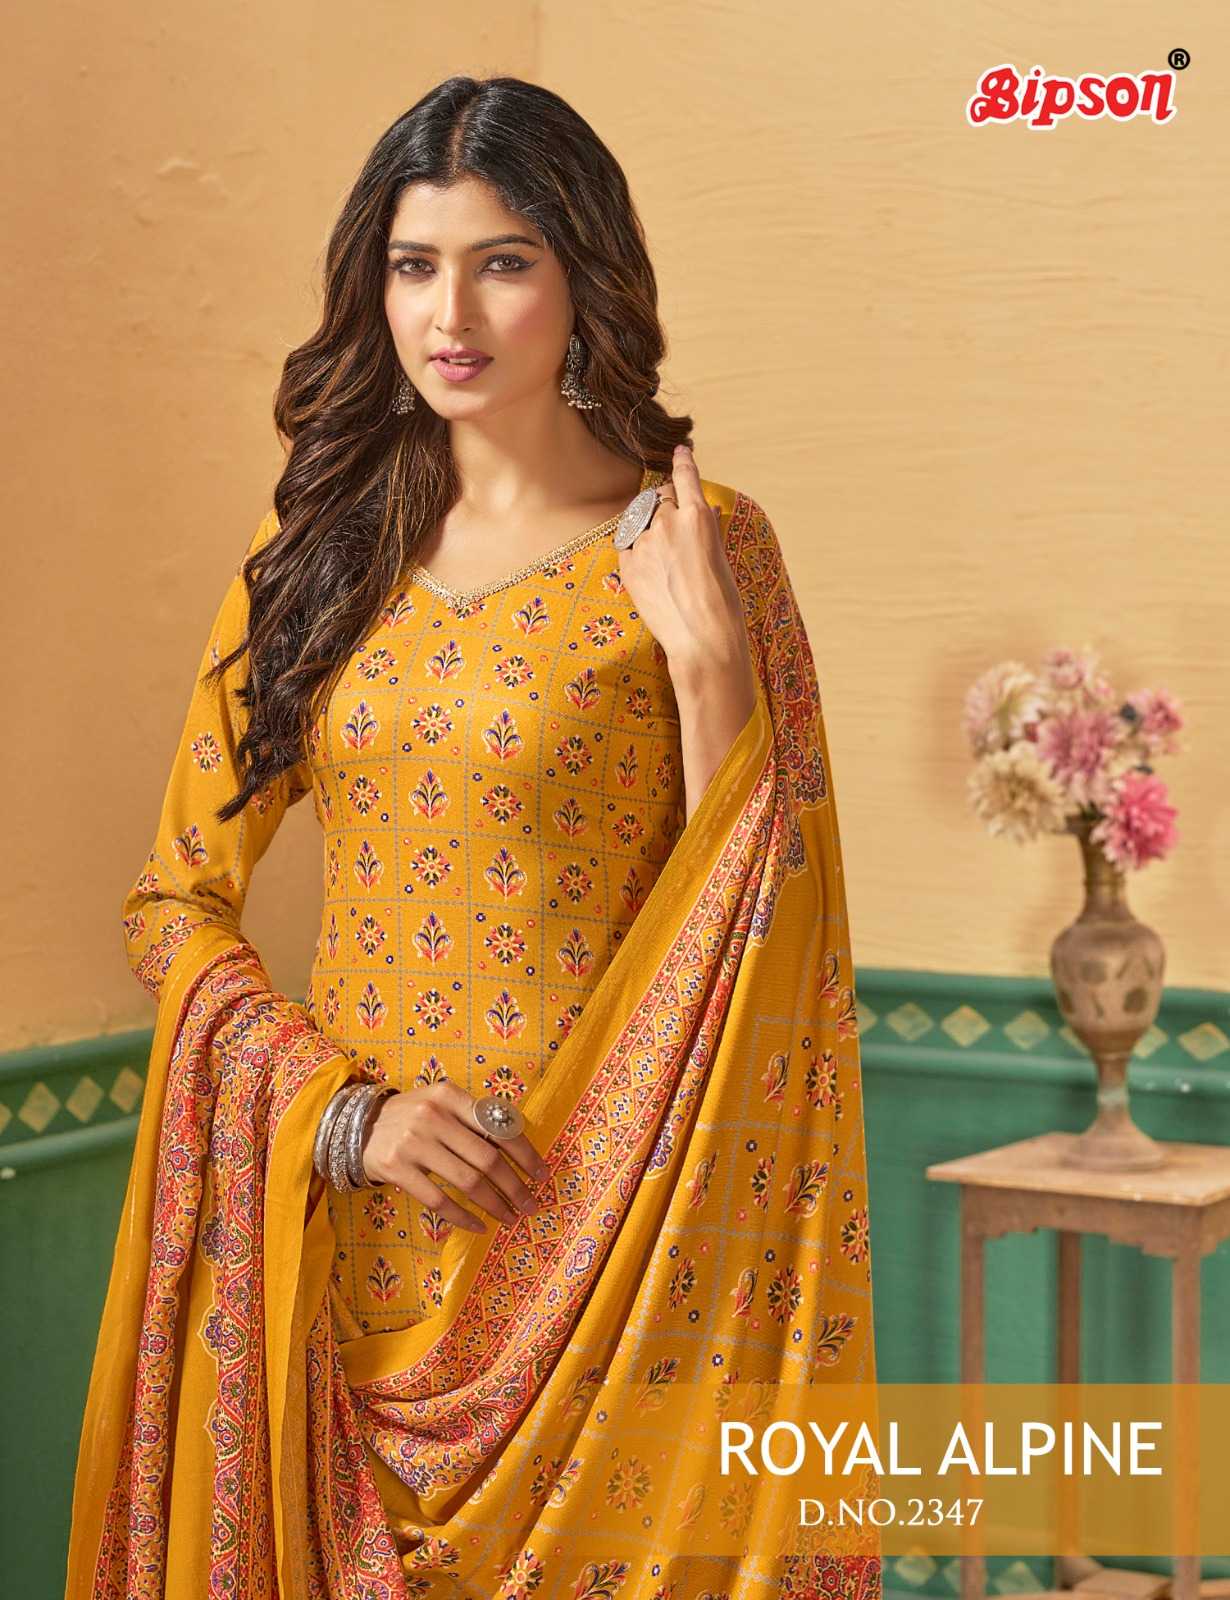 bipson royal alpine 2345-2346-2347 diwali special new collection of dress material